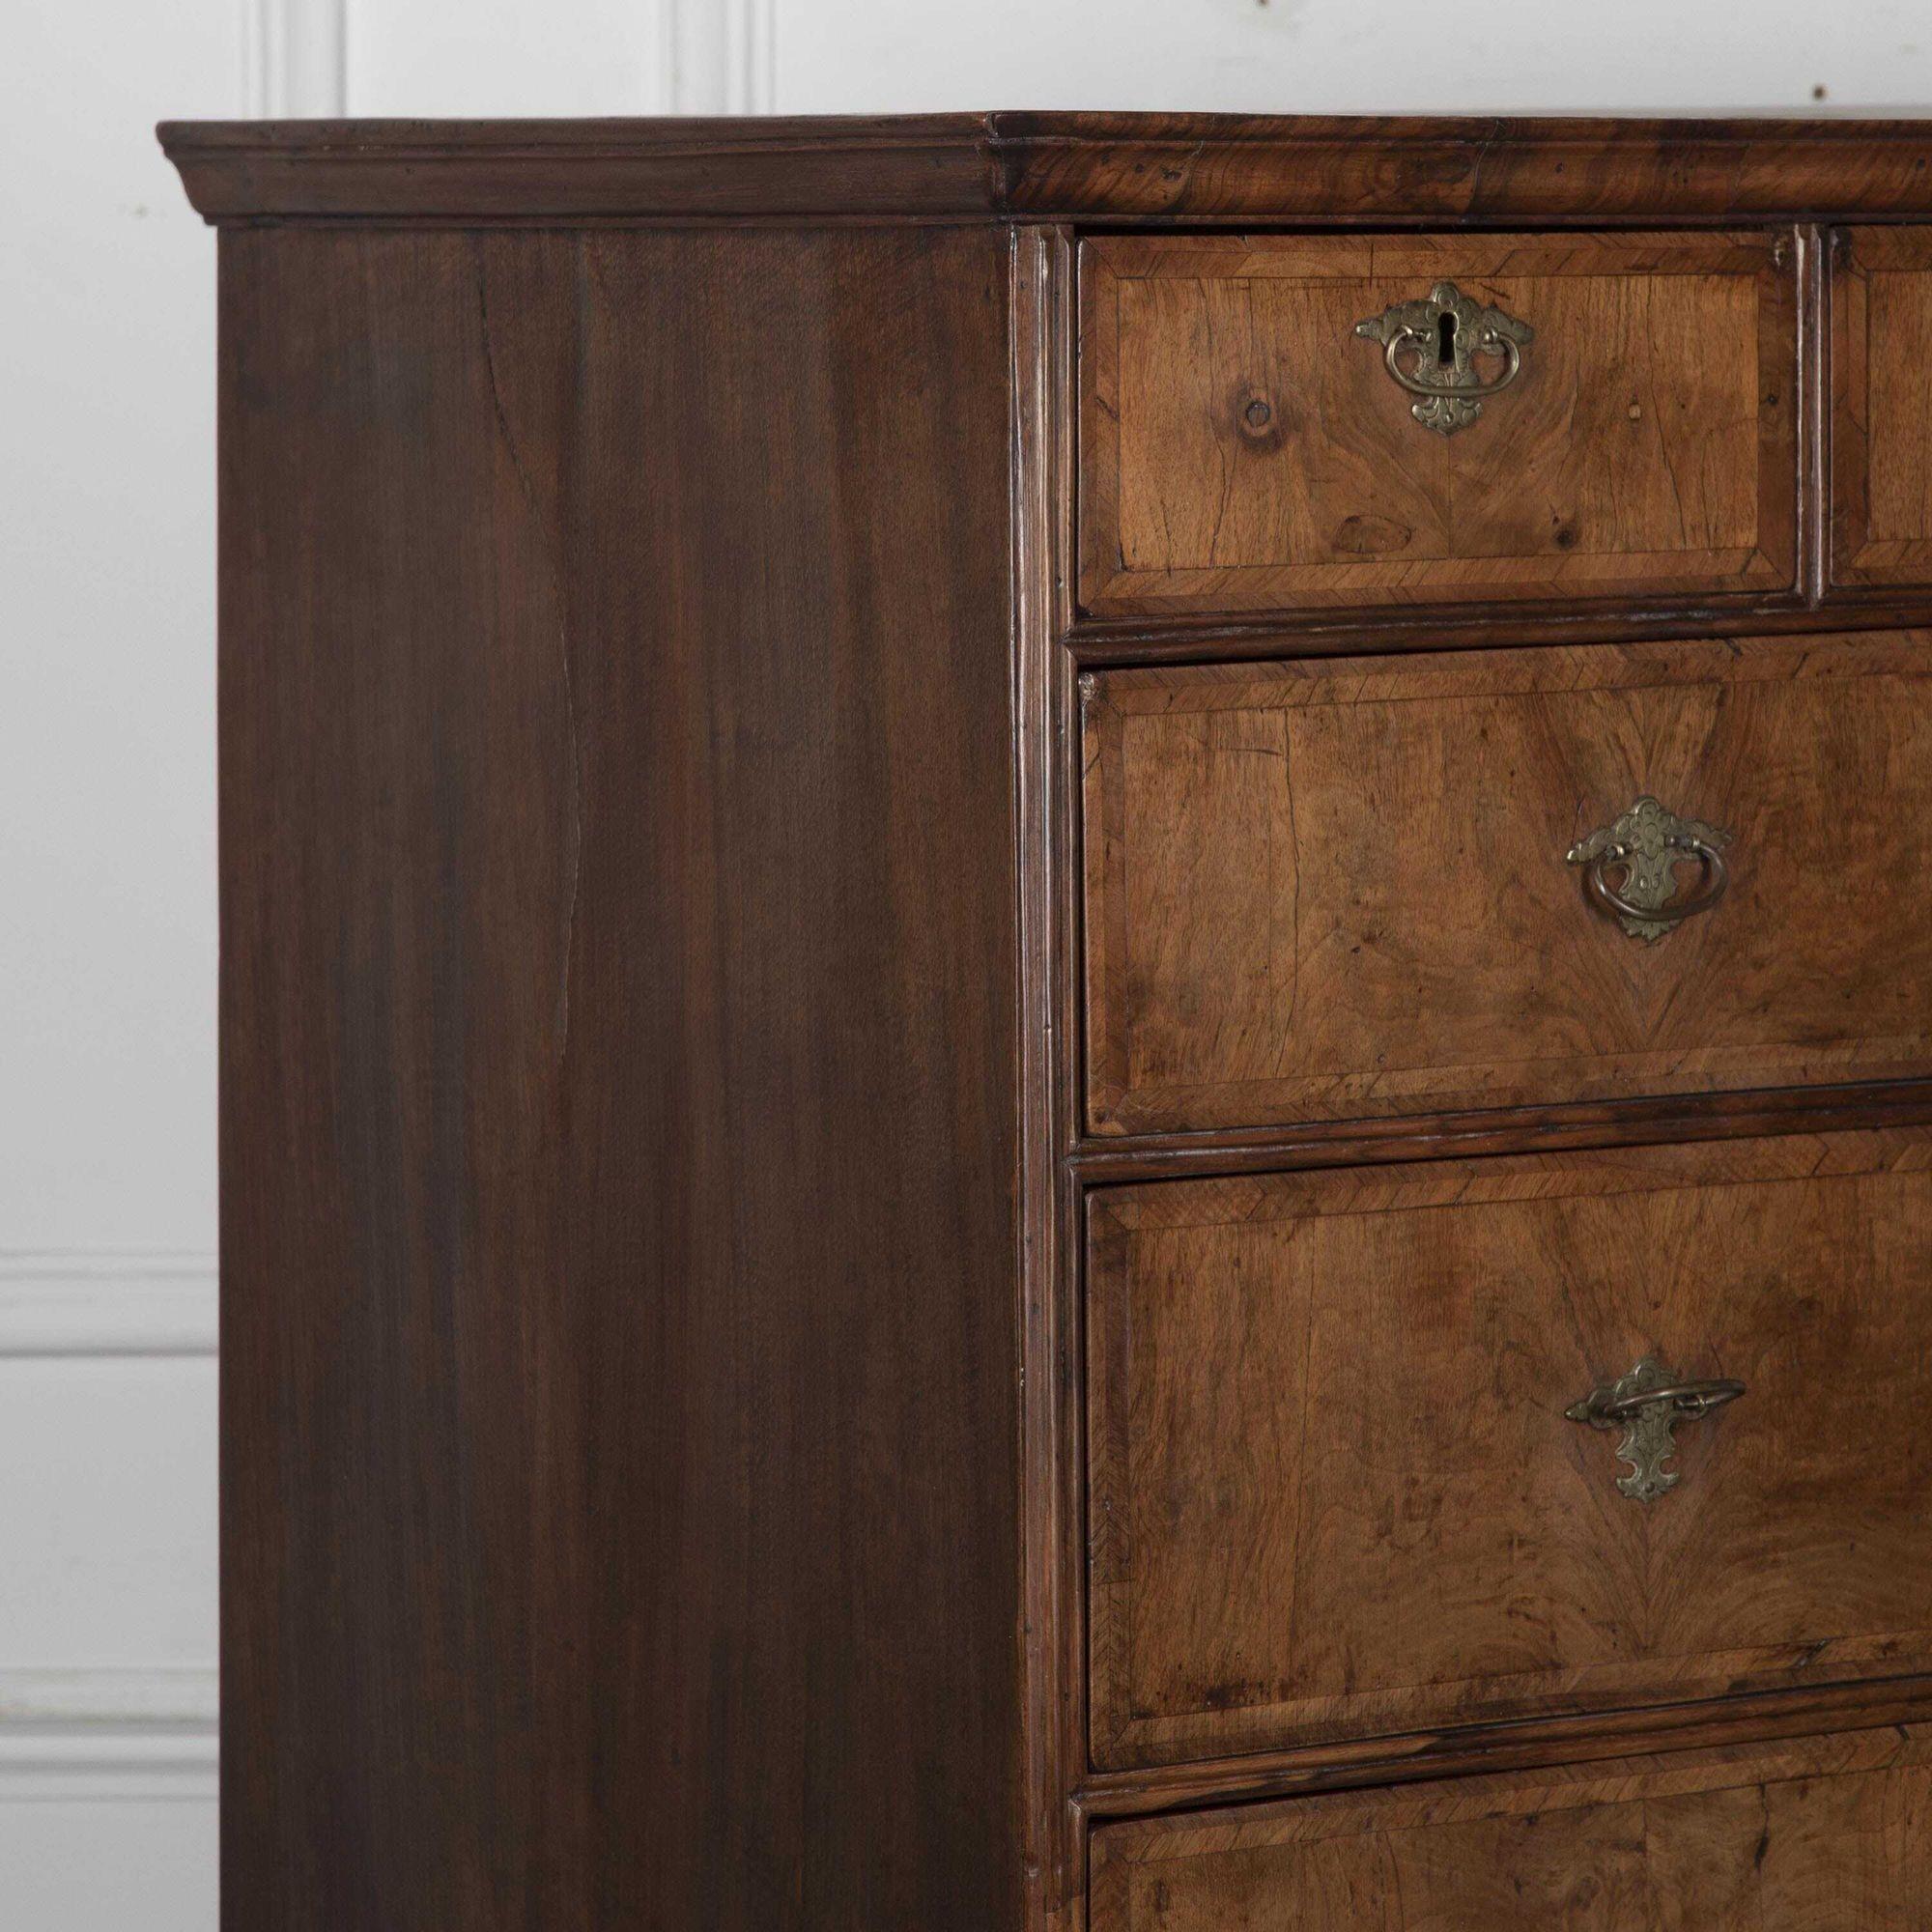 Beautiful 18th Century English walnut chest on stand.
This fine piece is of small proportion and retains its beautiful, slightly faded finish and patination. The oak-lined drawers are decorated with brass drop handles.
The piece has only had one